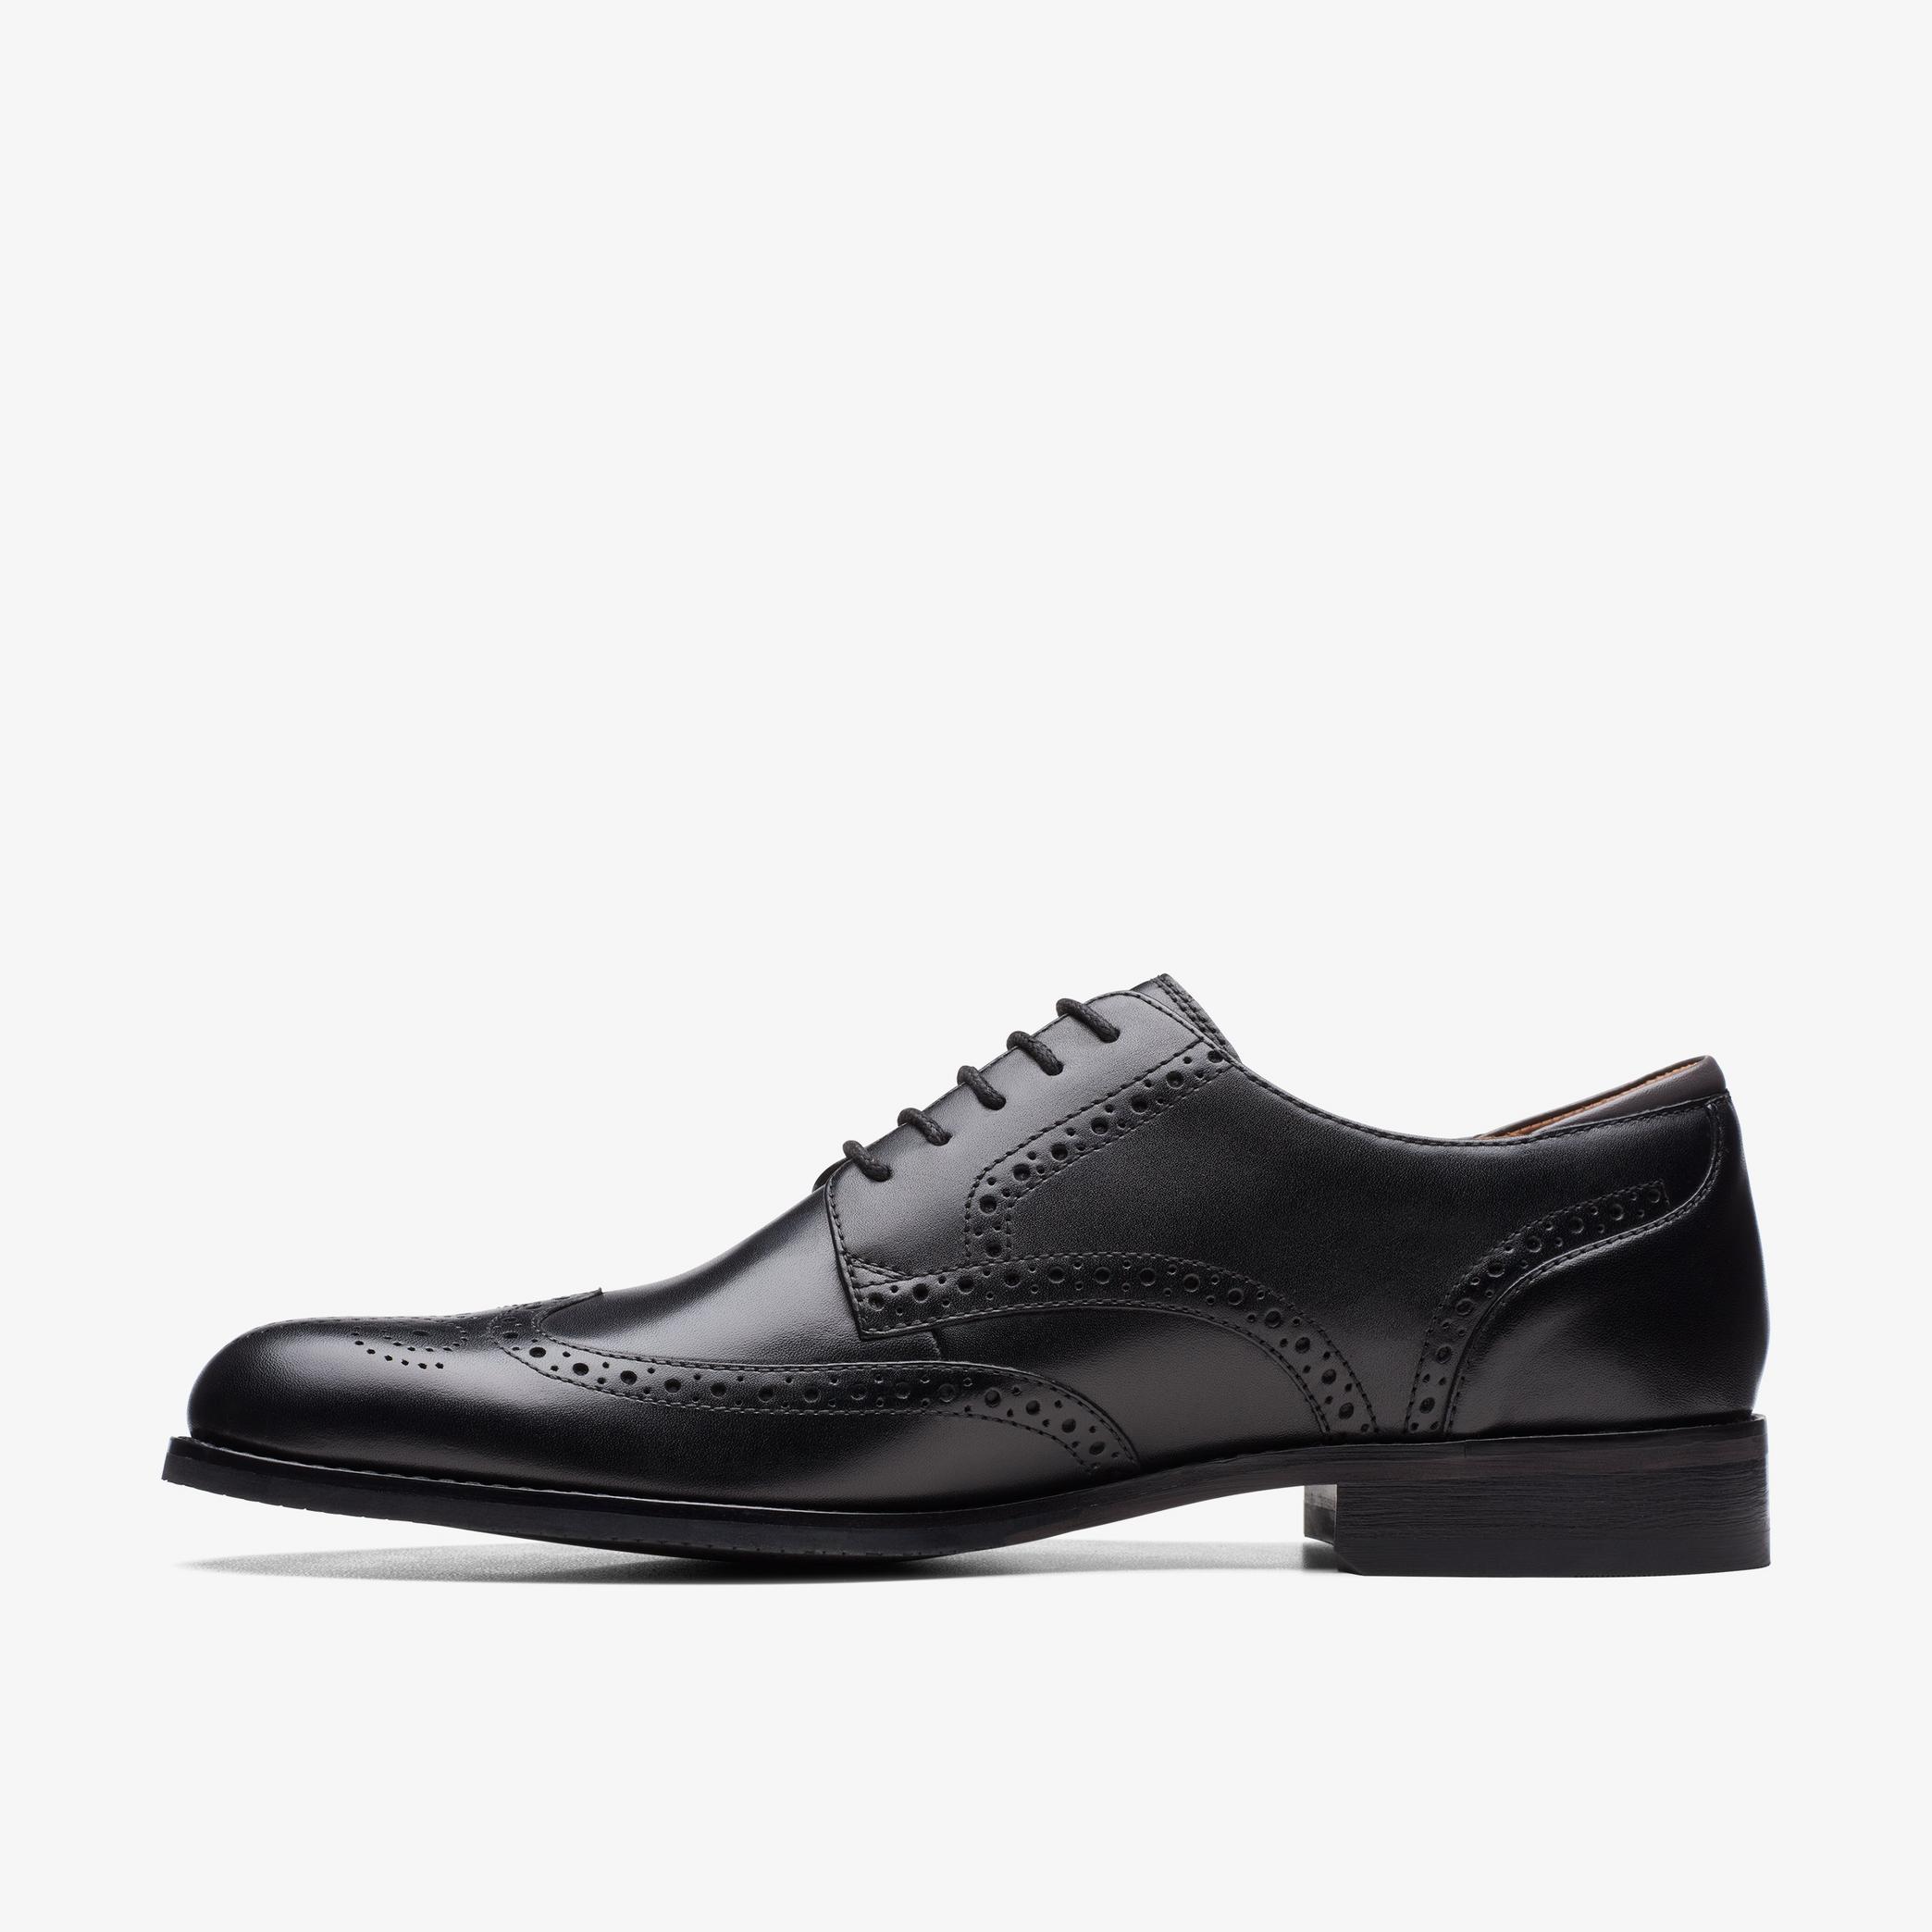 Craft Arlo Limit Black Leather Oxford Shoes, view 2 of 6